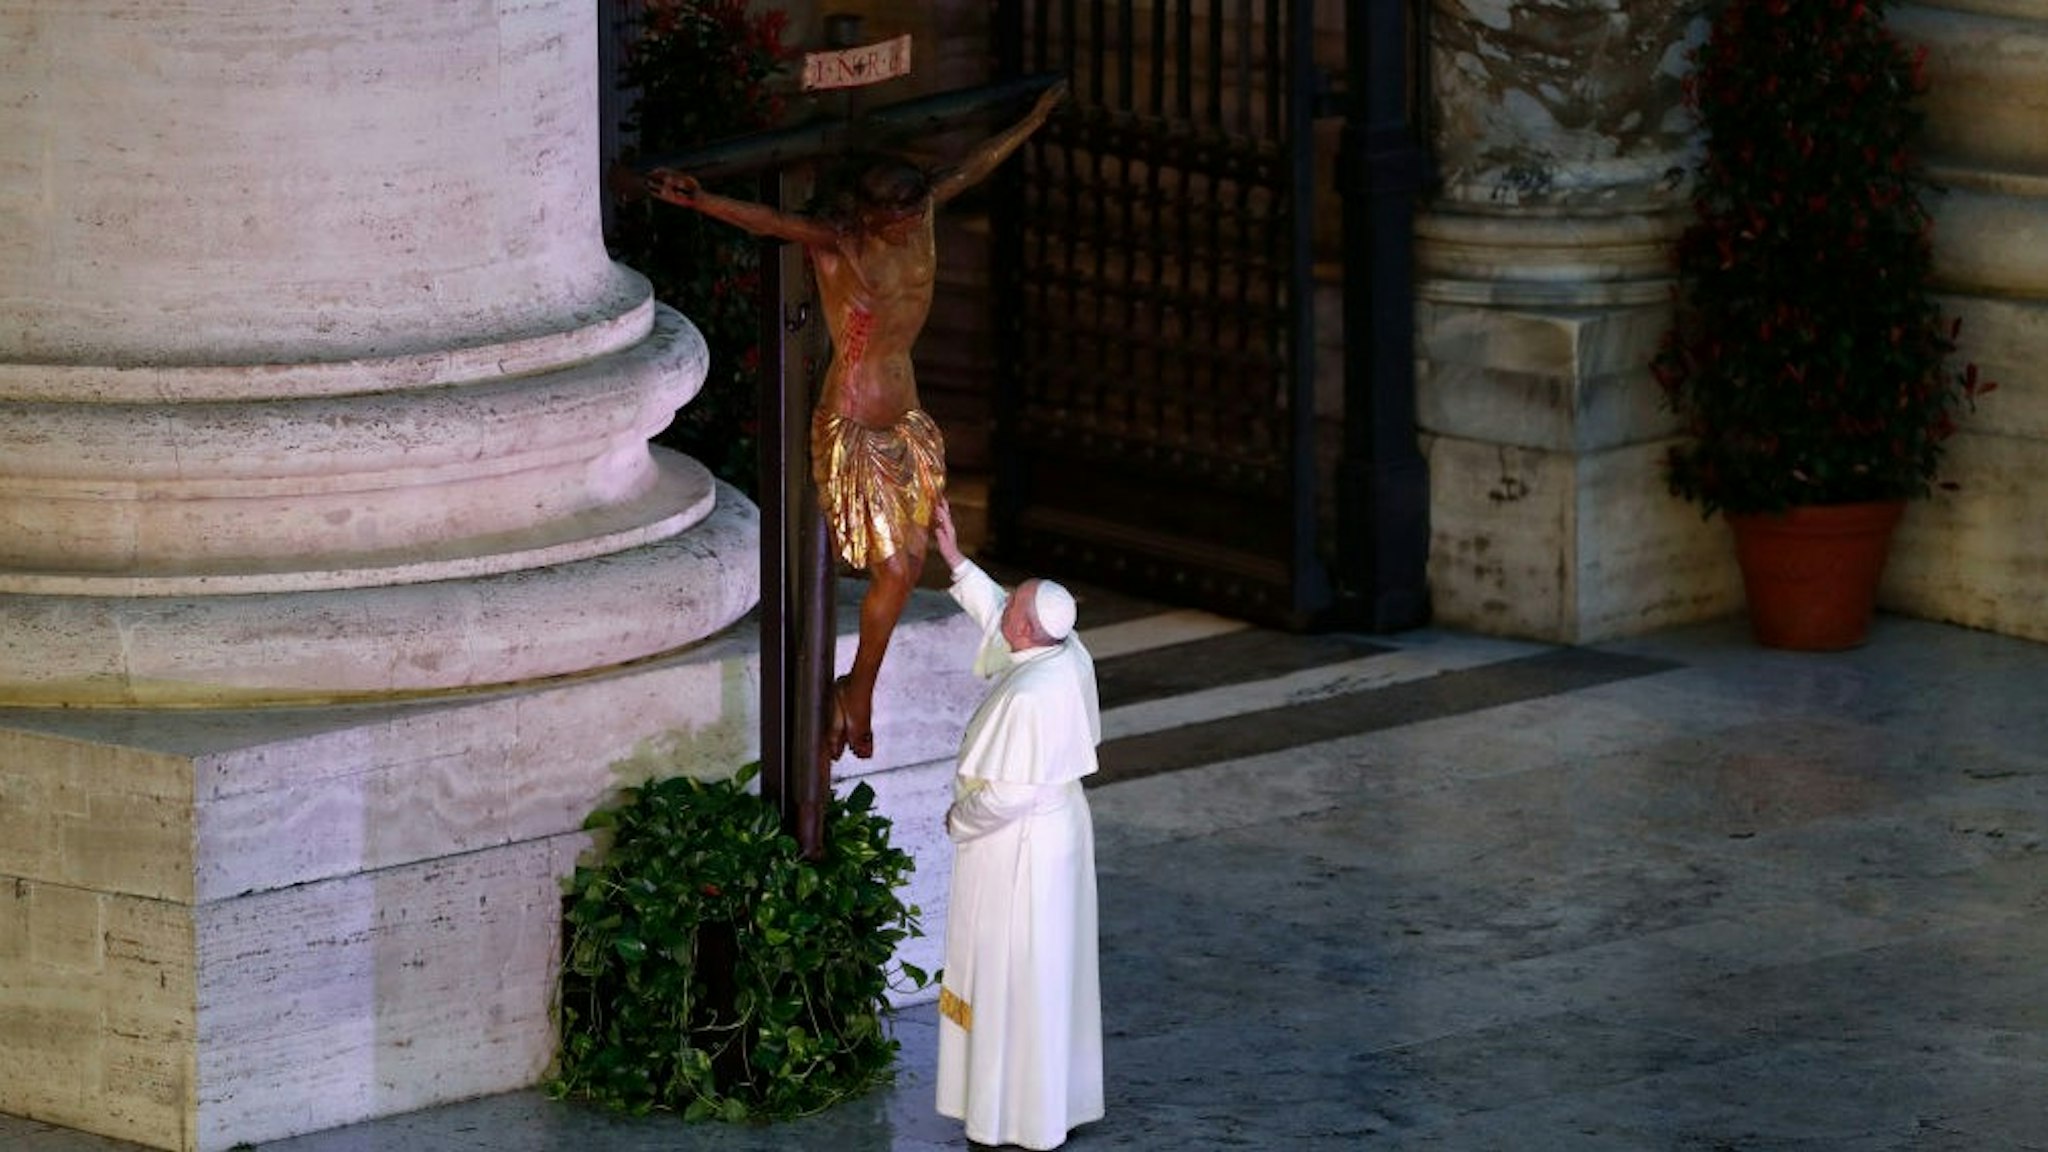 Pope Francis blesses a miraculous crucifix that in 1552 was carried in a procession around Rome to stop the great plague, that was brought from the San Marcello al Corso church in Rome, during a moment of prayer on the sagrato of St Peters Basilica, the platform at the top of the steps immediately in front of the façade of the Church, to be concluded with the Pope giving the Urbi et Orbi Blessing, on March 27, 2020 at the Vatican. (Photo by YARA NARDI / POOL / AFP) (Photo by